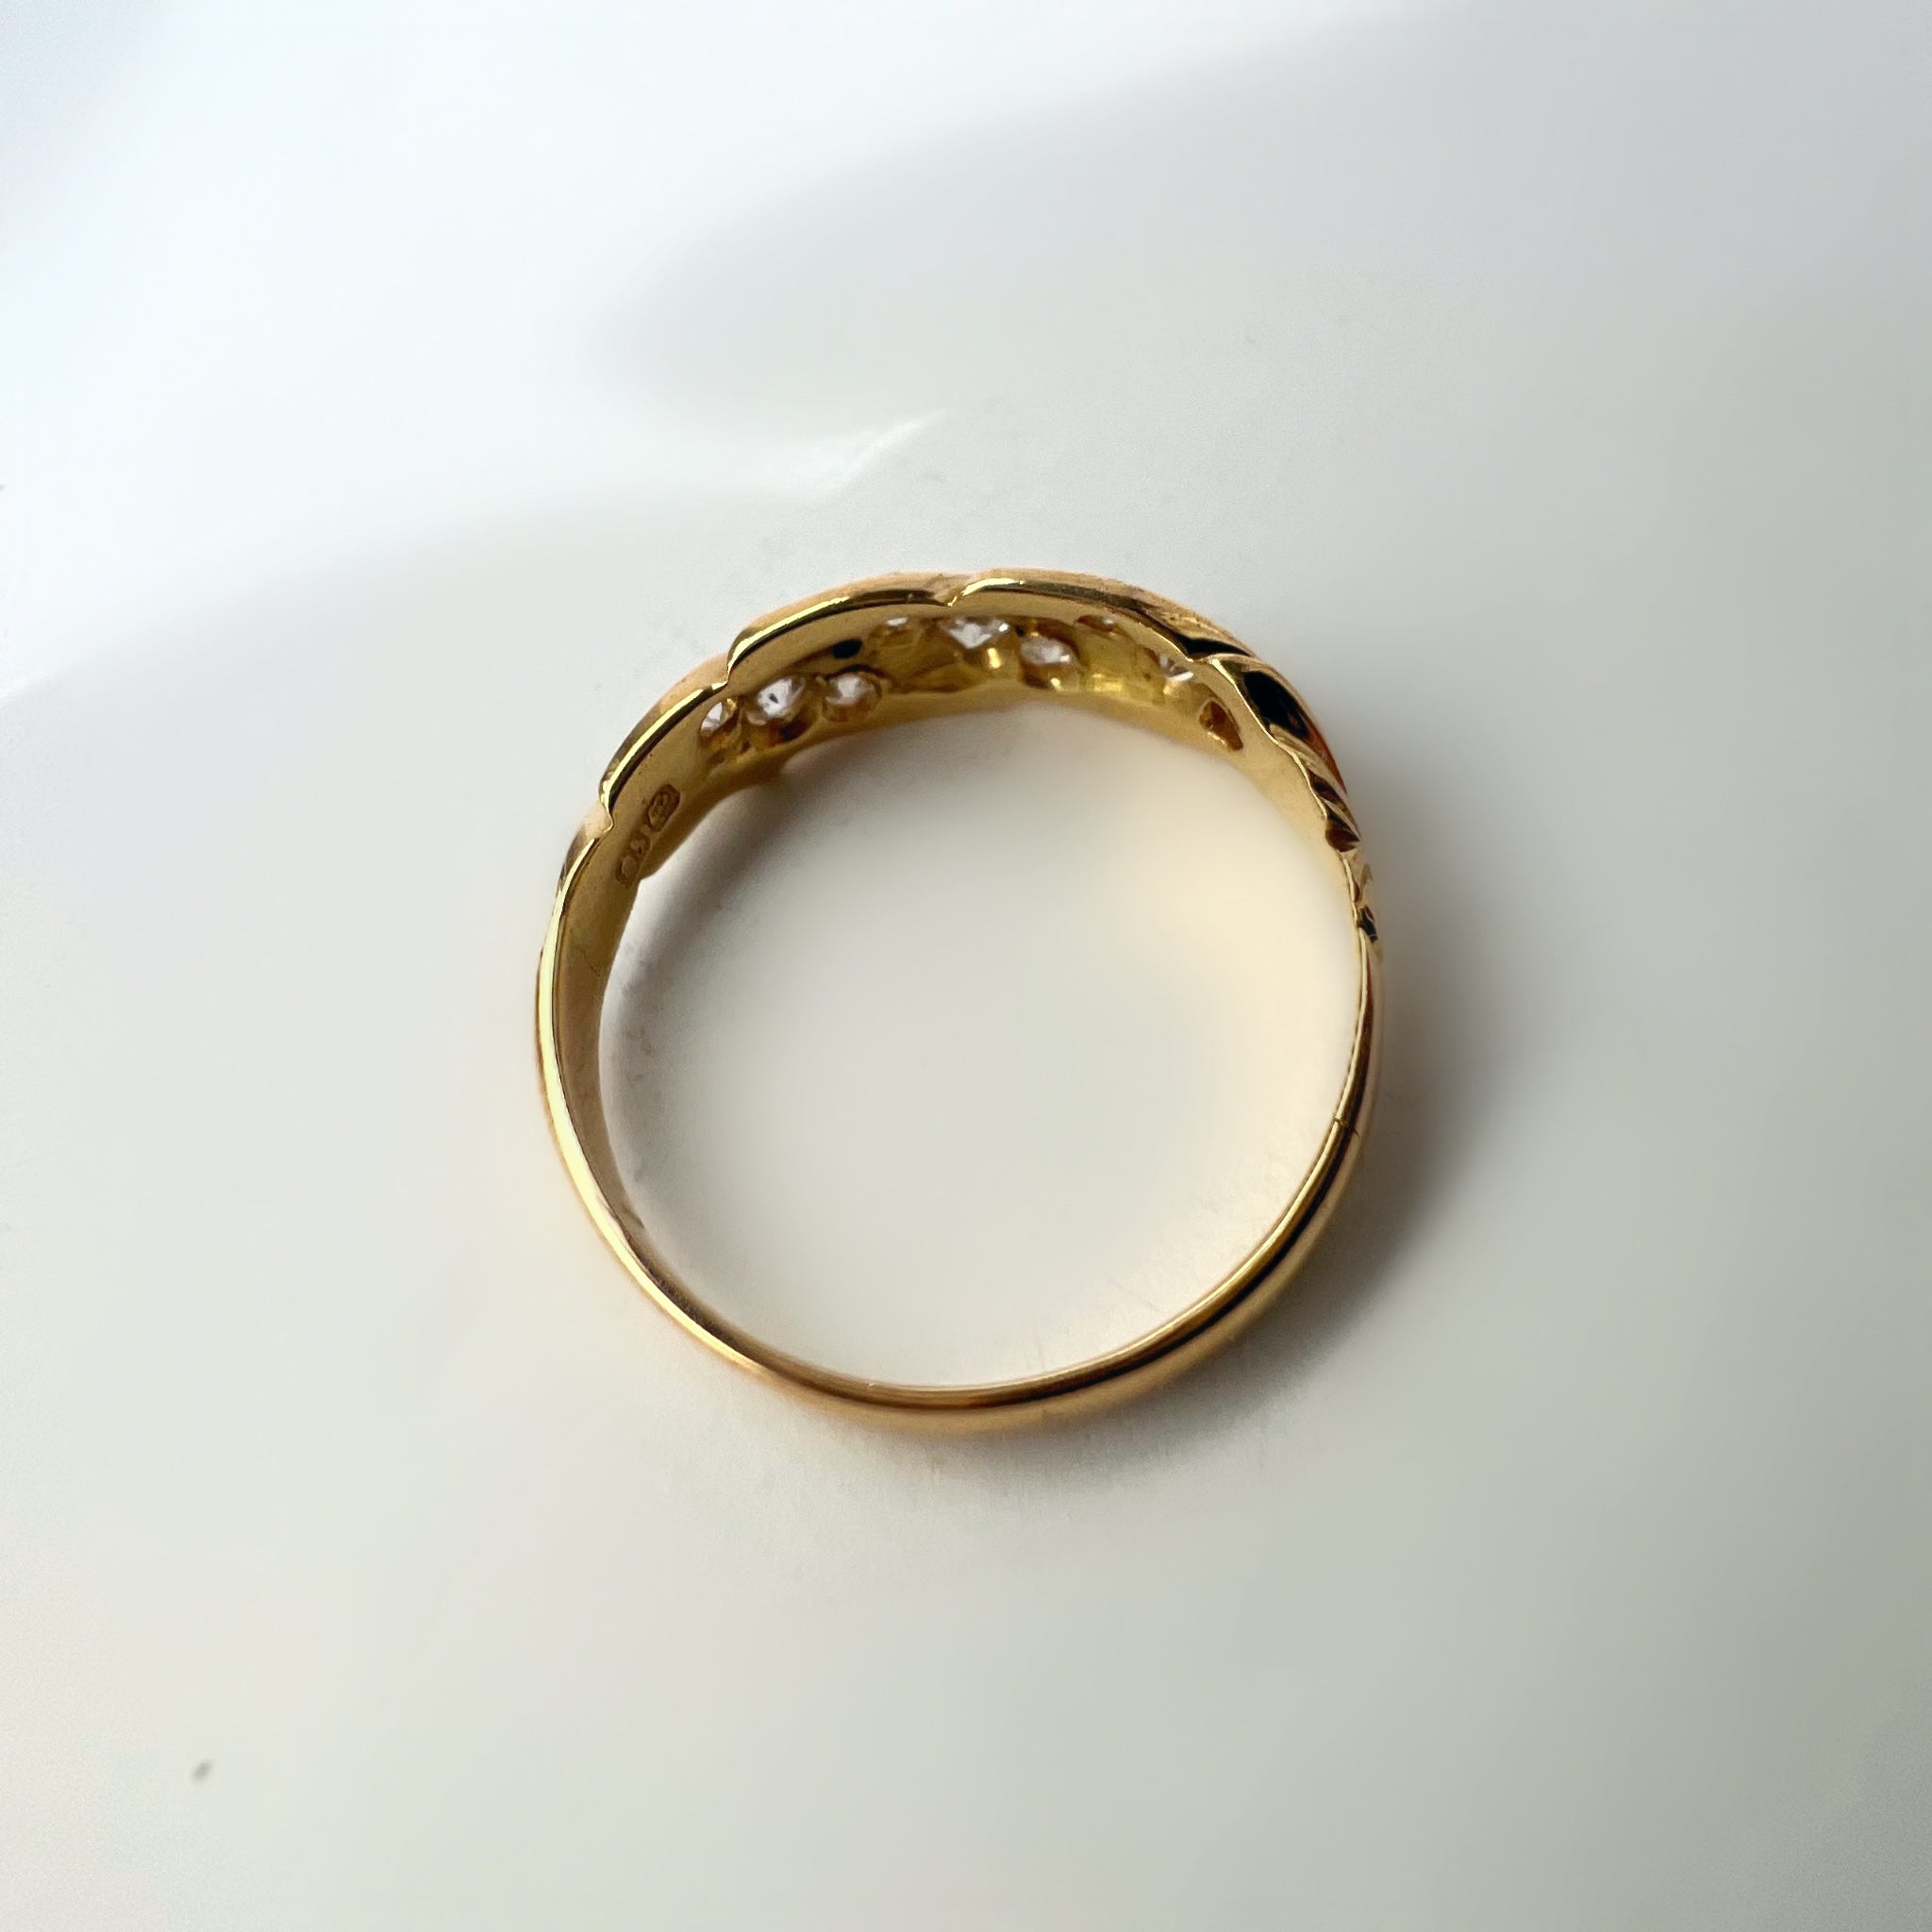 Antique Gold Band Ring with Single Cut Diamonds